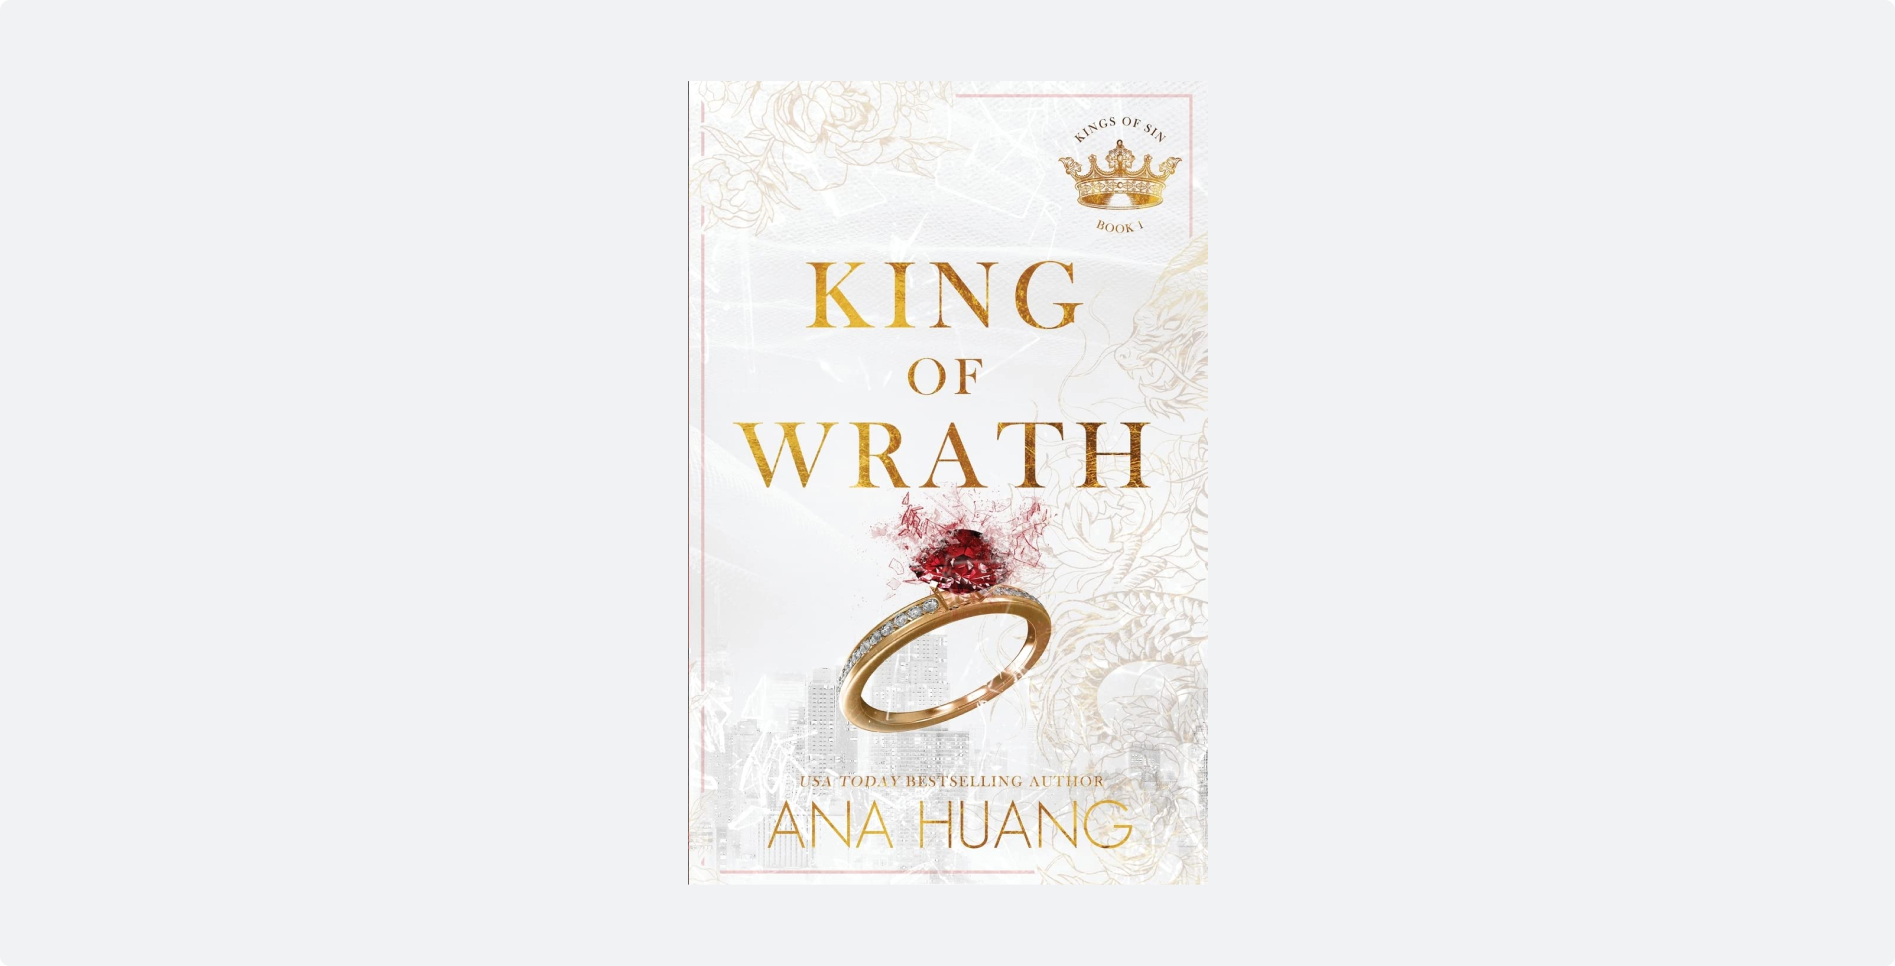 King of wrath book